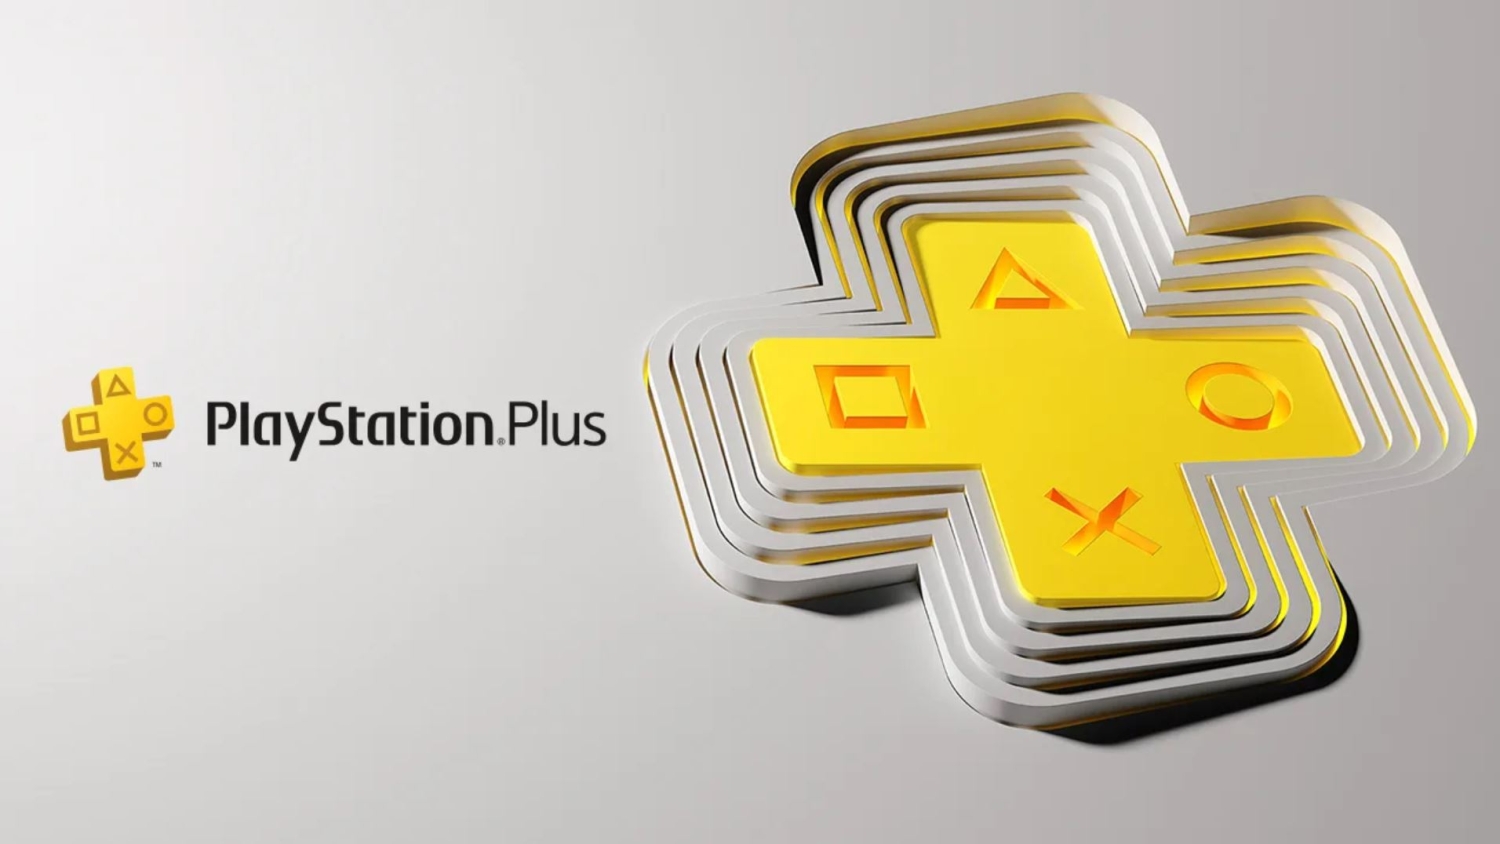 PeterOvo on X: Microsoft has put two Xbox studios games on PlayStation  Plus in 2023 alone. Regulators are lying when they say that Microsoft is  not being honest about their intentions with